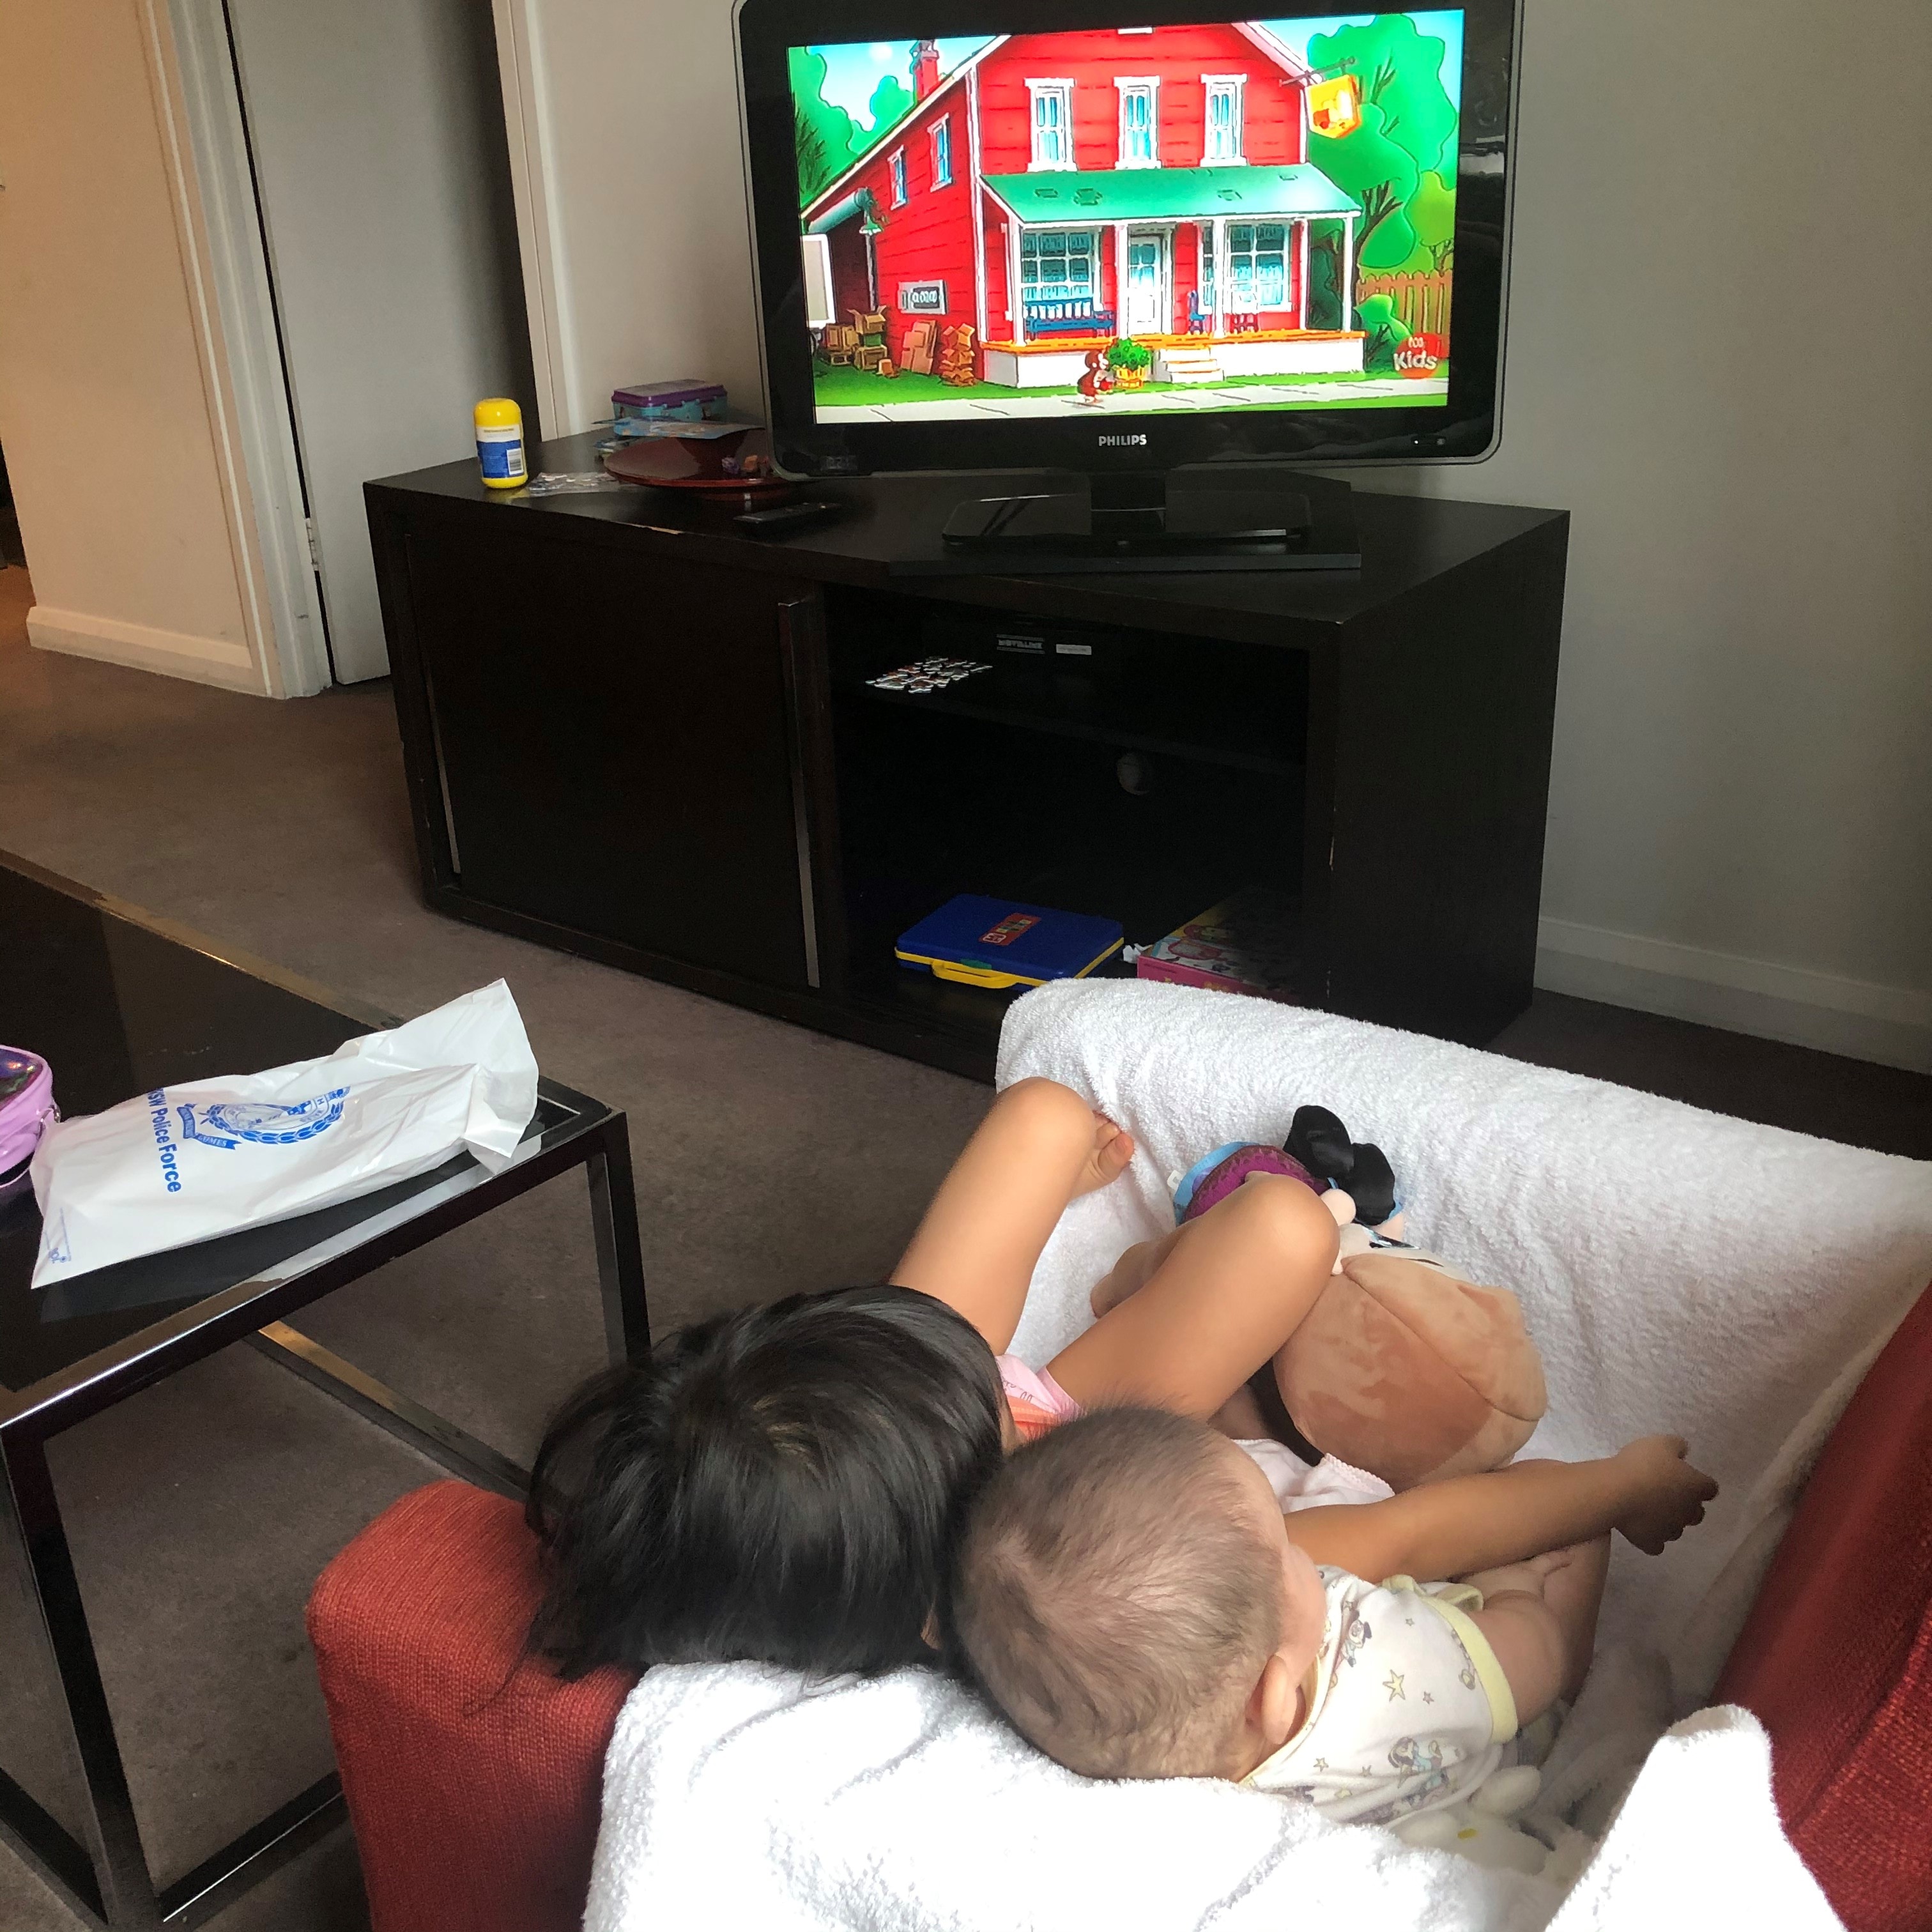 Priscilla Pang and her two kids were isolating for 14 days in a Sydney service apartment.